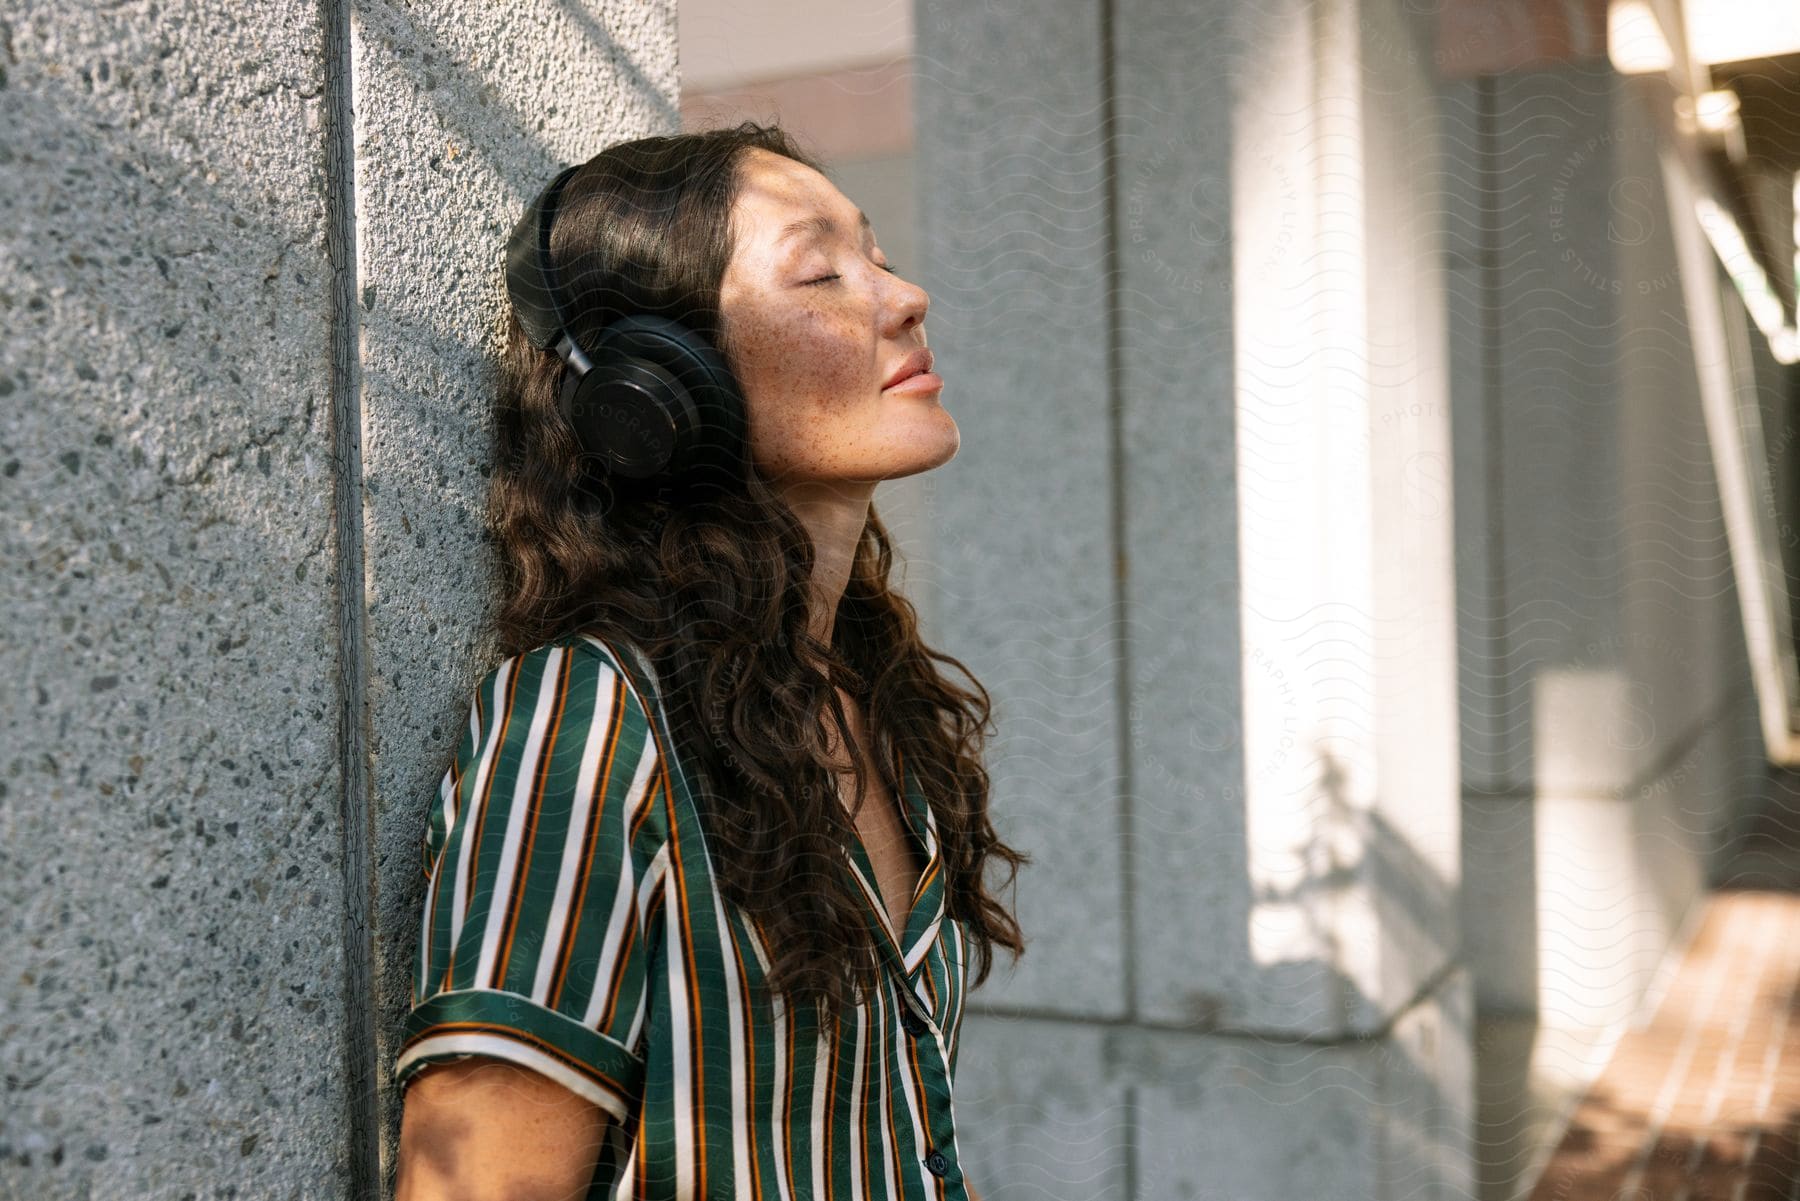 A person in los angeles unwinding and having fun wearing headphones and a happy expression